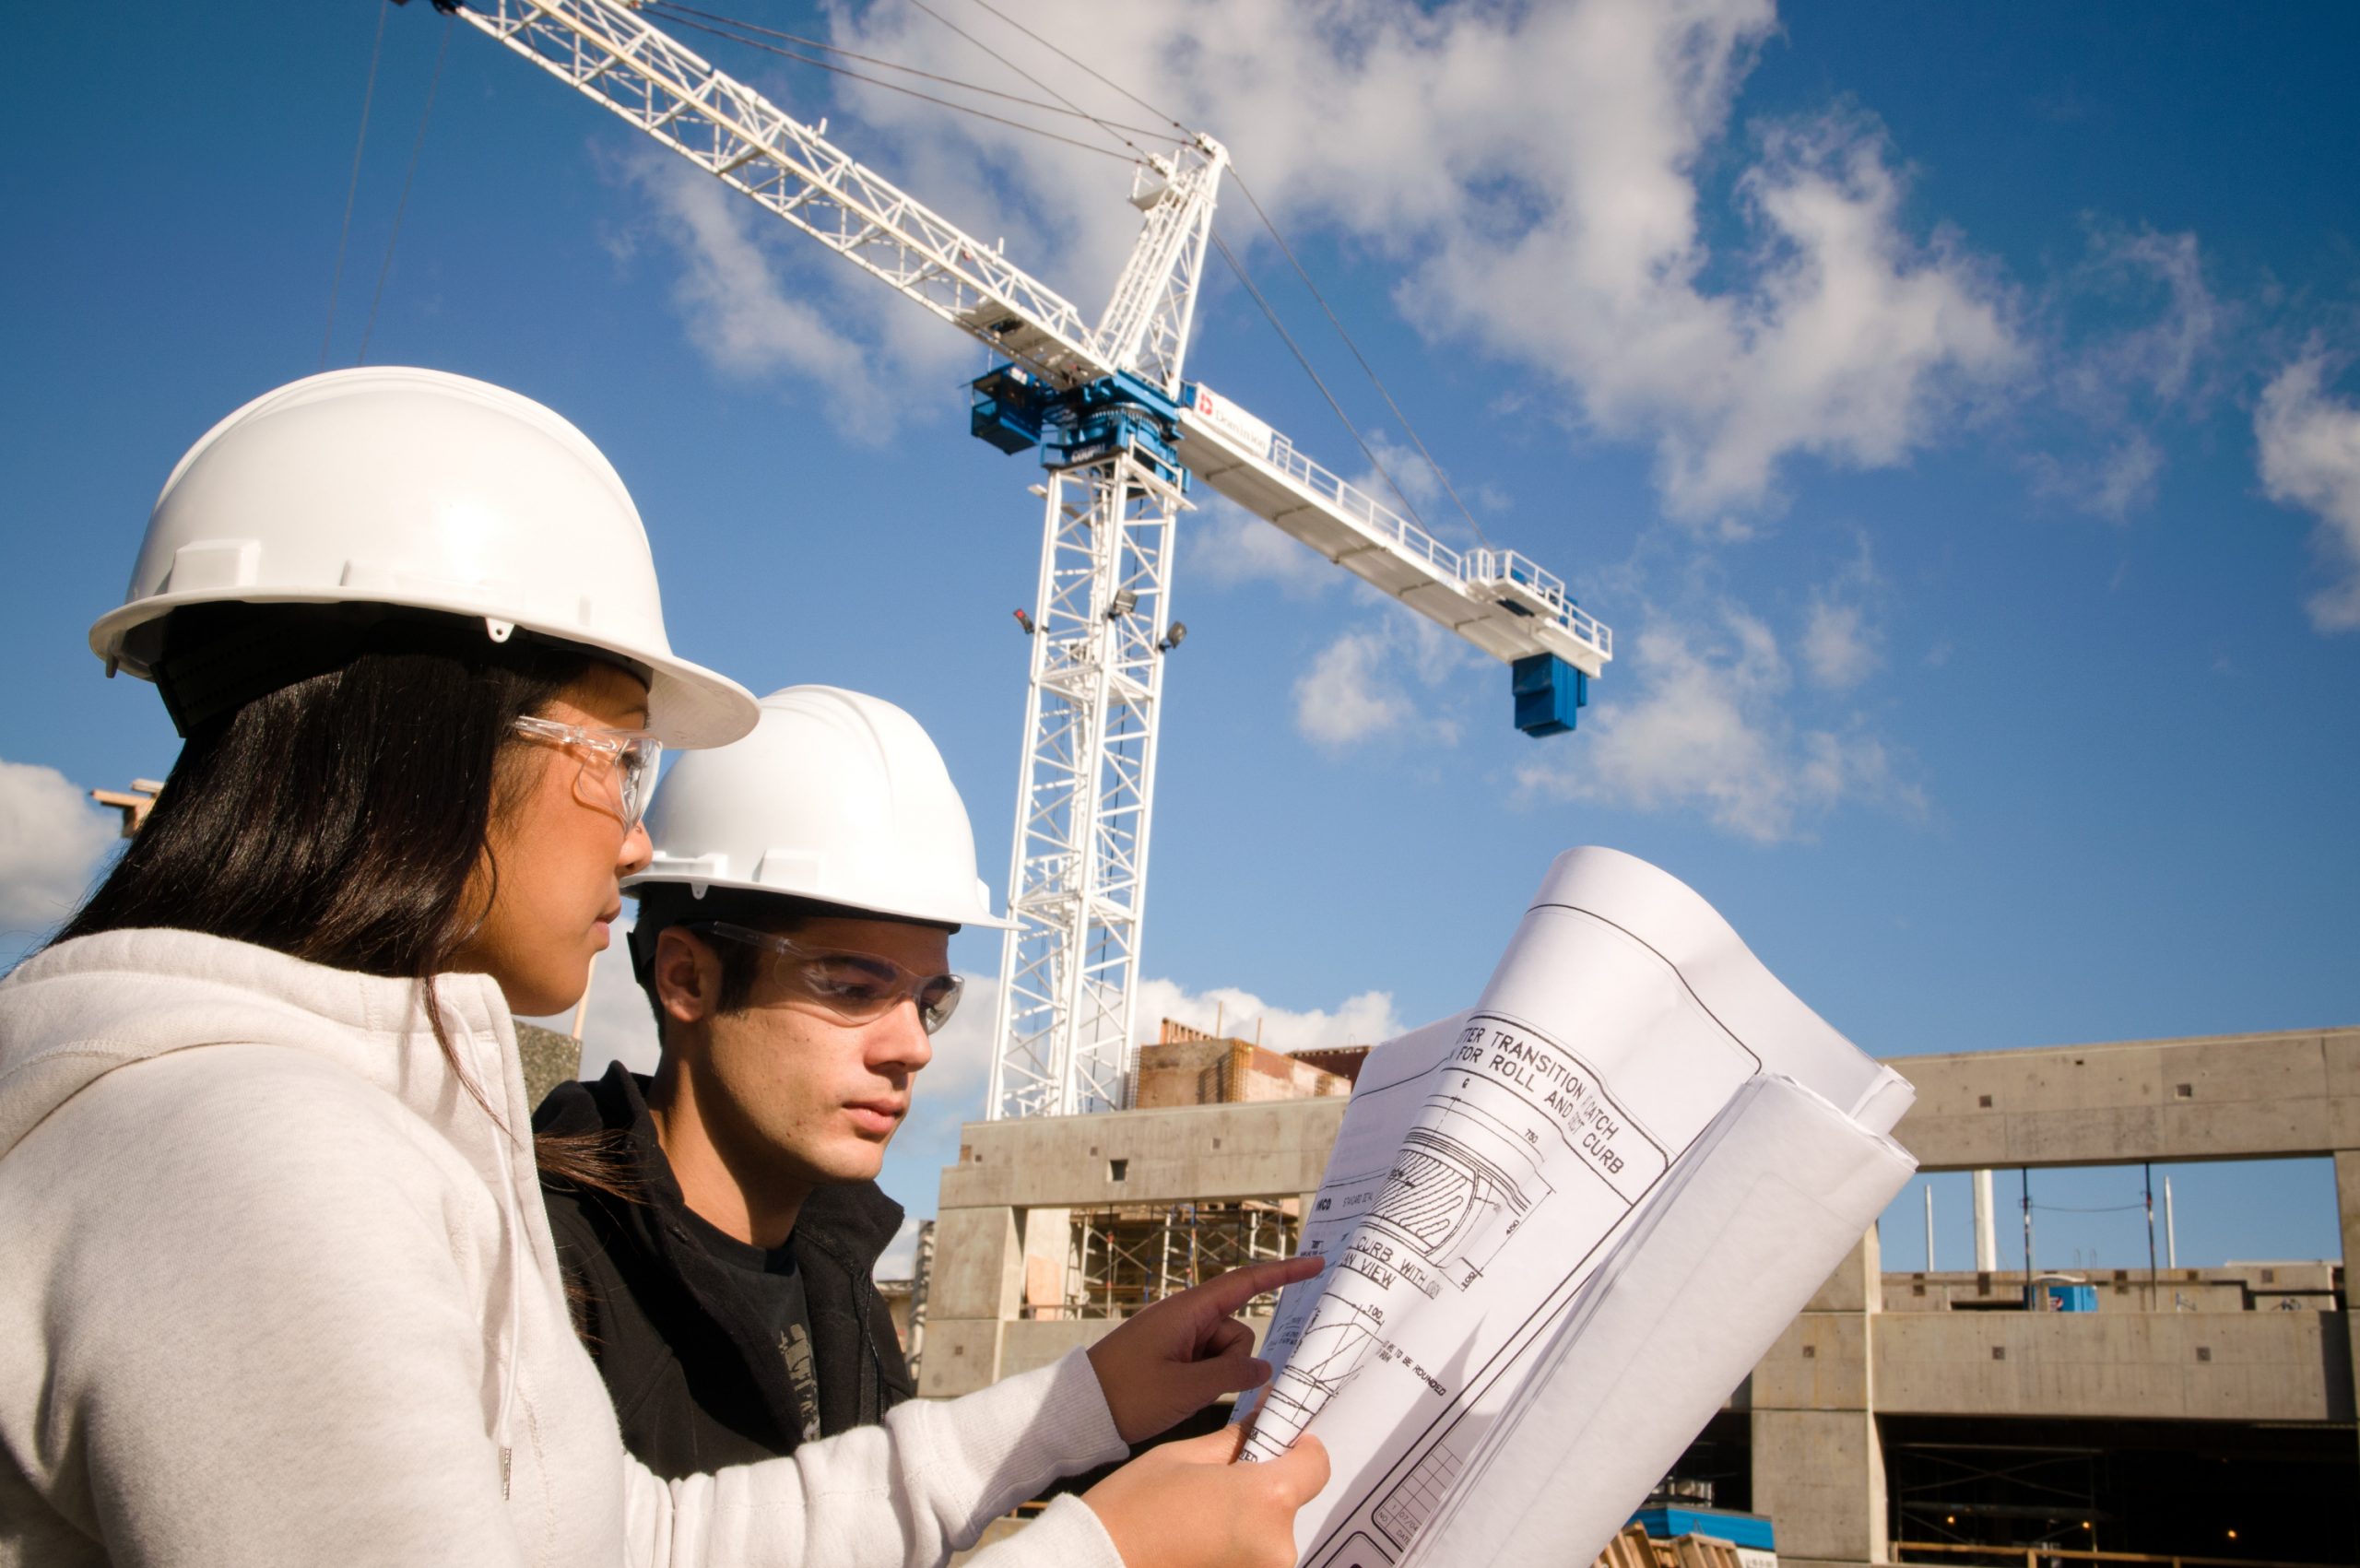 Two construction students discussing with each other, with a white crane in the background.